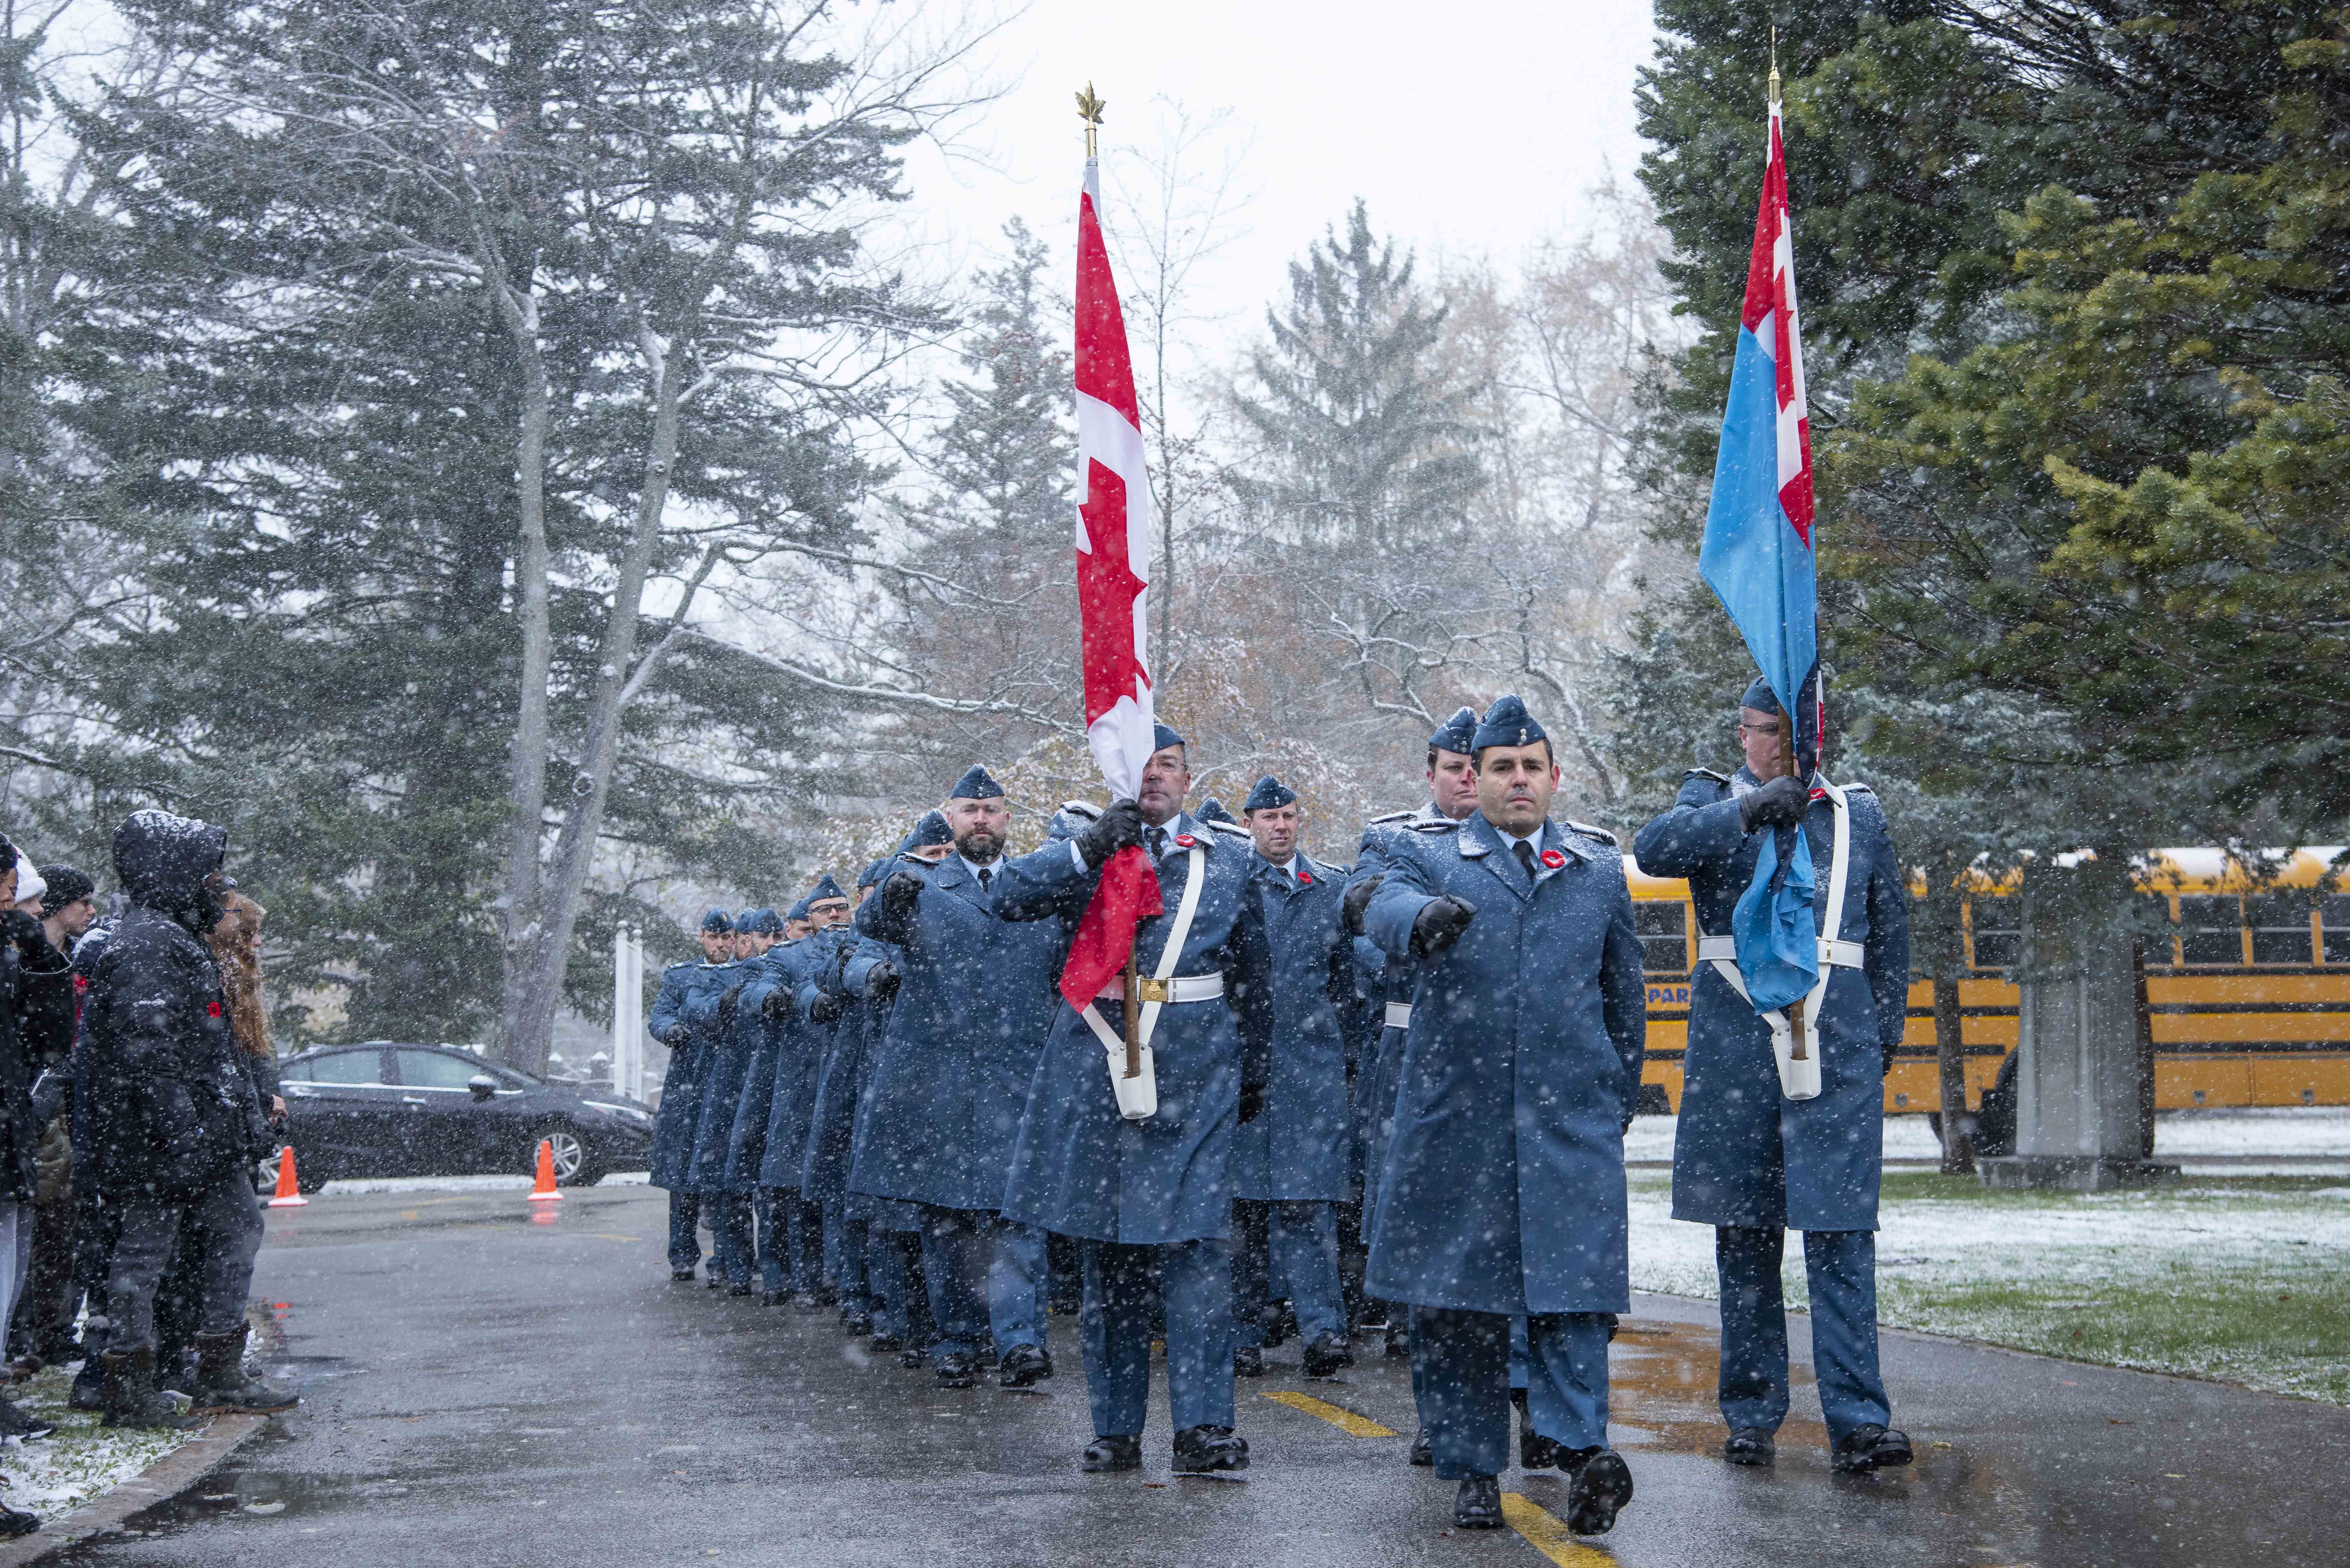 Members of the Royal Canadian Air Force march towards the location of the 2019 Remembrance Day ceremony held at Mount Pleasant Cemetery in Toronto. PHOTO: Corporal Lynette Ai Dang, BM10-2019-0359-007